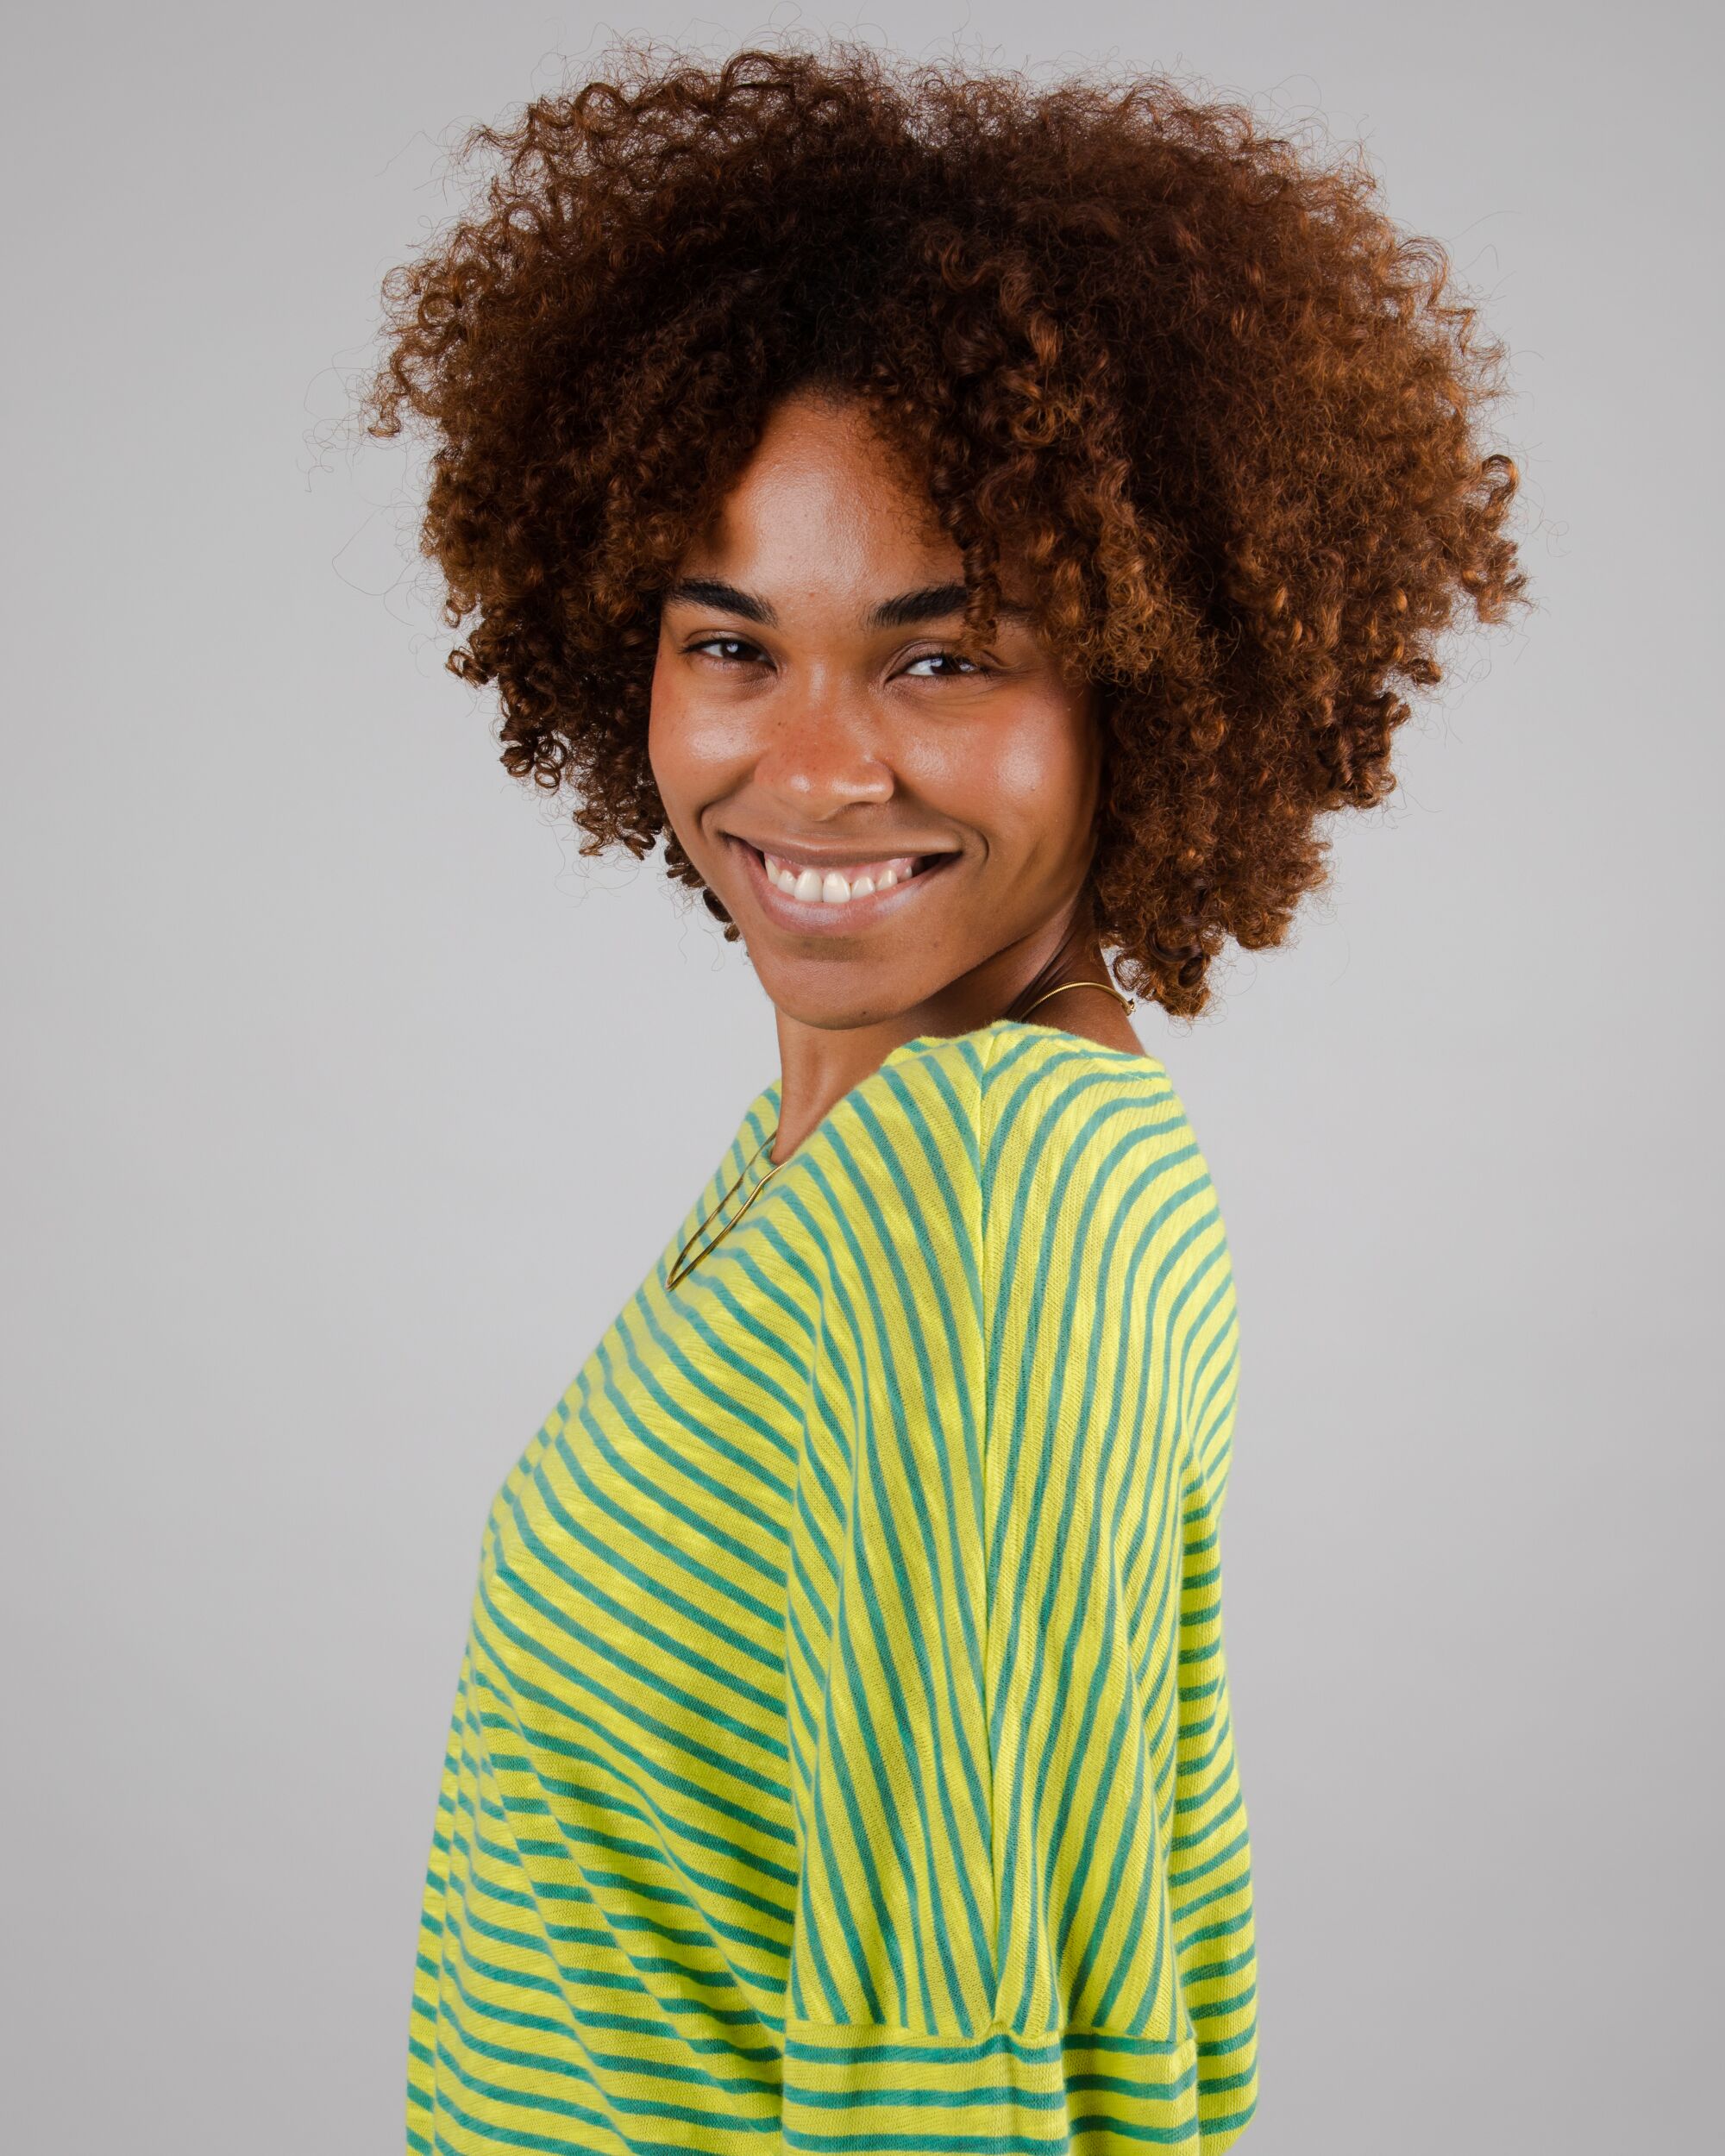 Sweatshirt Stripes Fine Knit Cotton in Lime made from organic cotton by Brava Fabrics